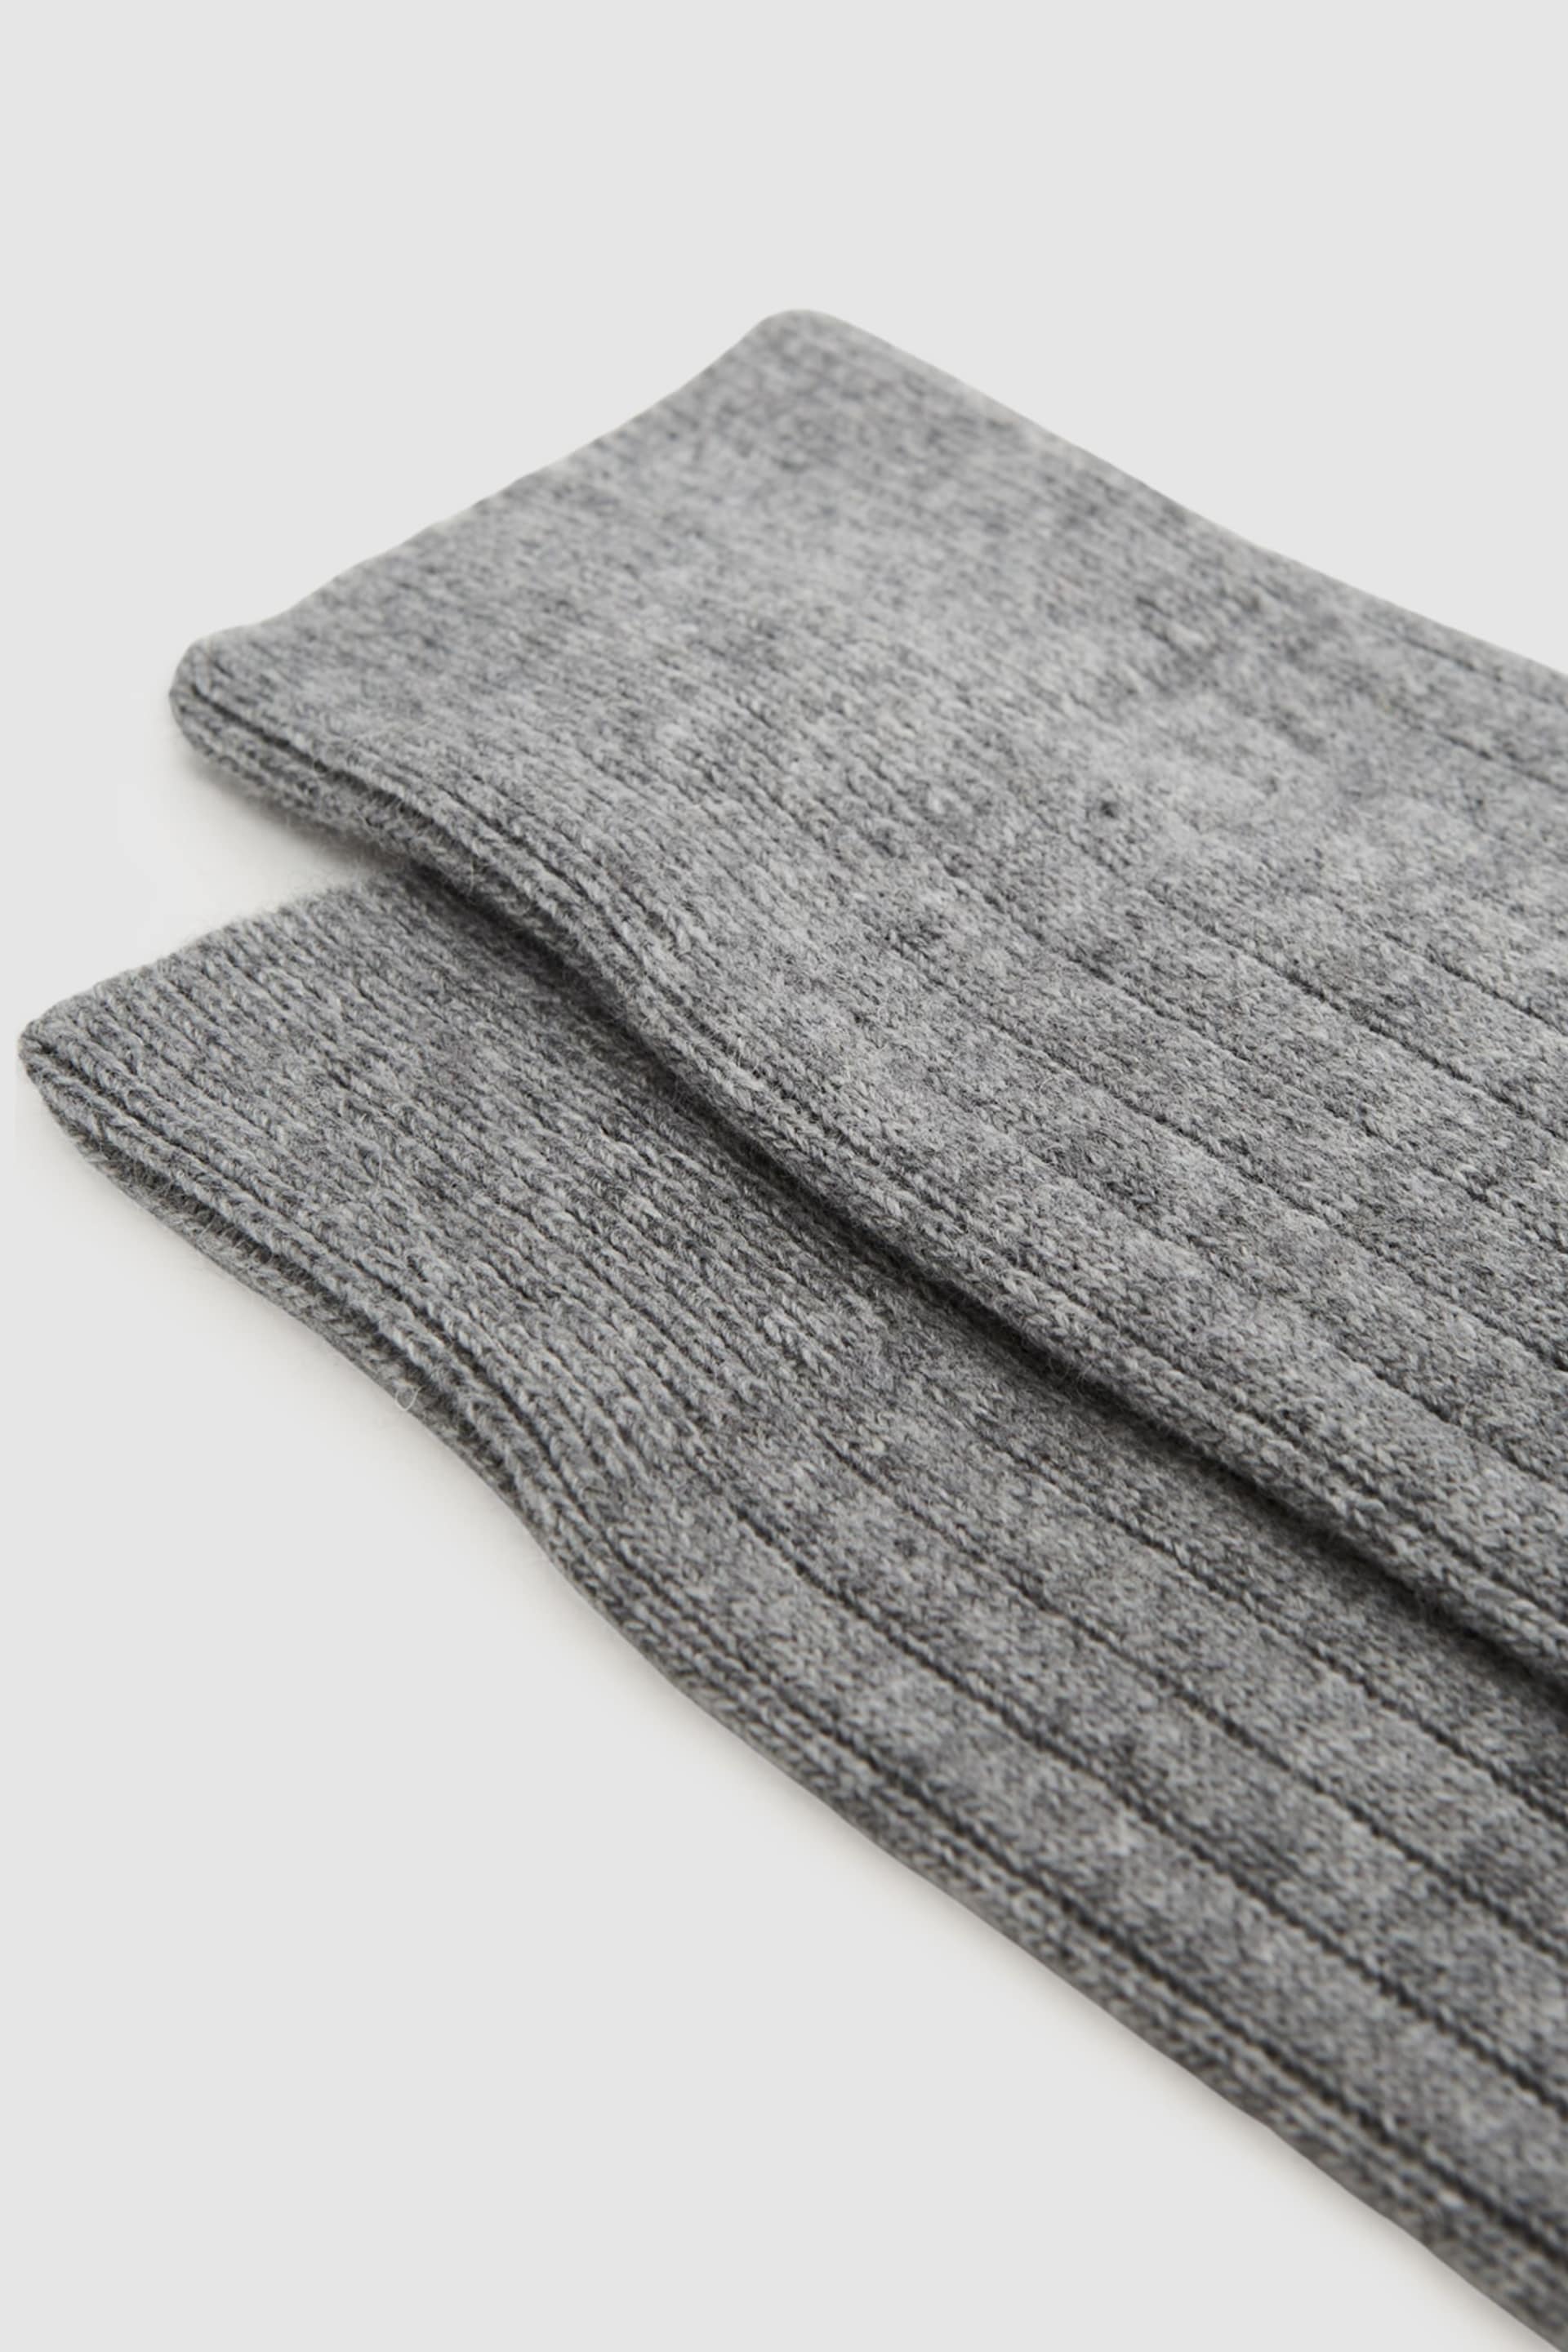 Reiss Soft Grey Cirby Wool-Cashmere Blend Ribbed Socks - Image 2 of 3